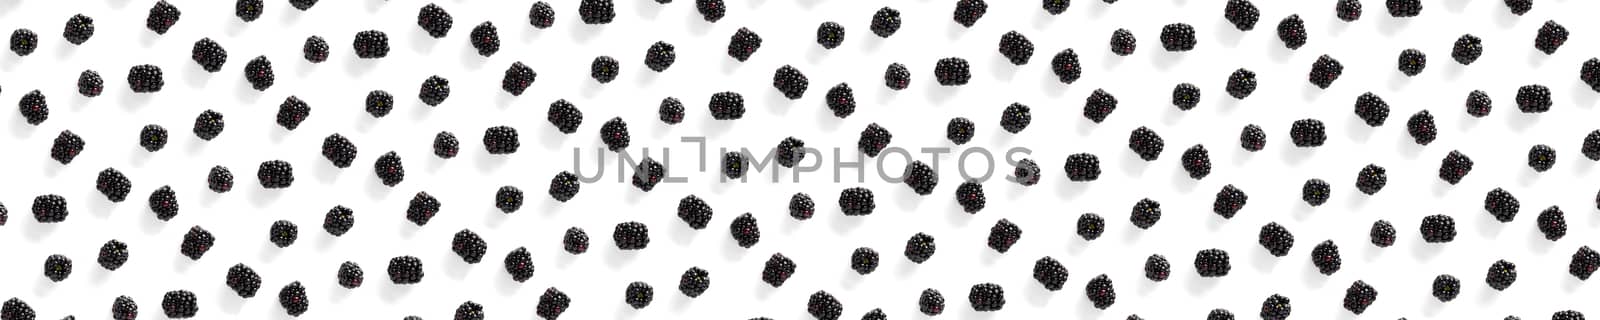 Banner Background from isolated brambles. Group of tasty blackberry isolated on white background. modern backround of falling blackberry or bramble. by PhotoTime